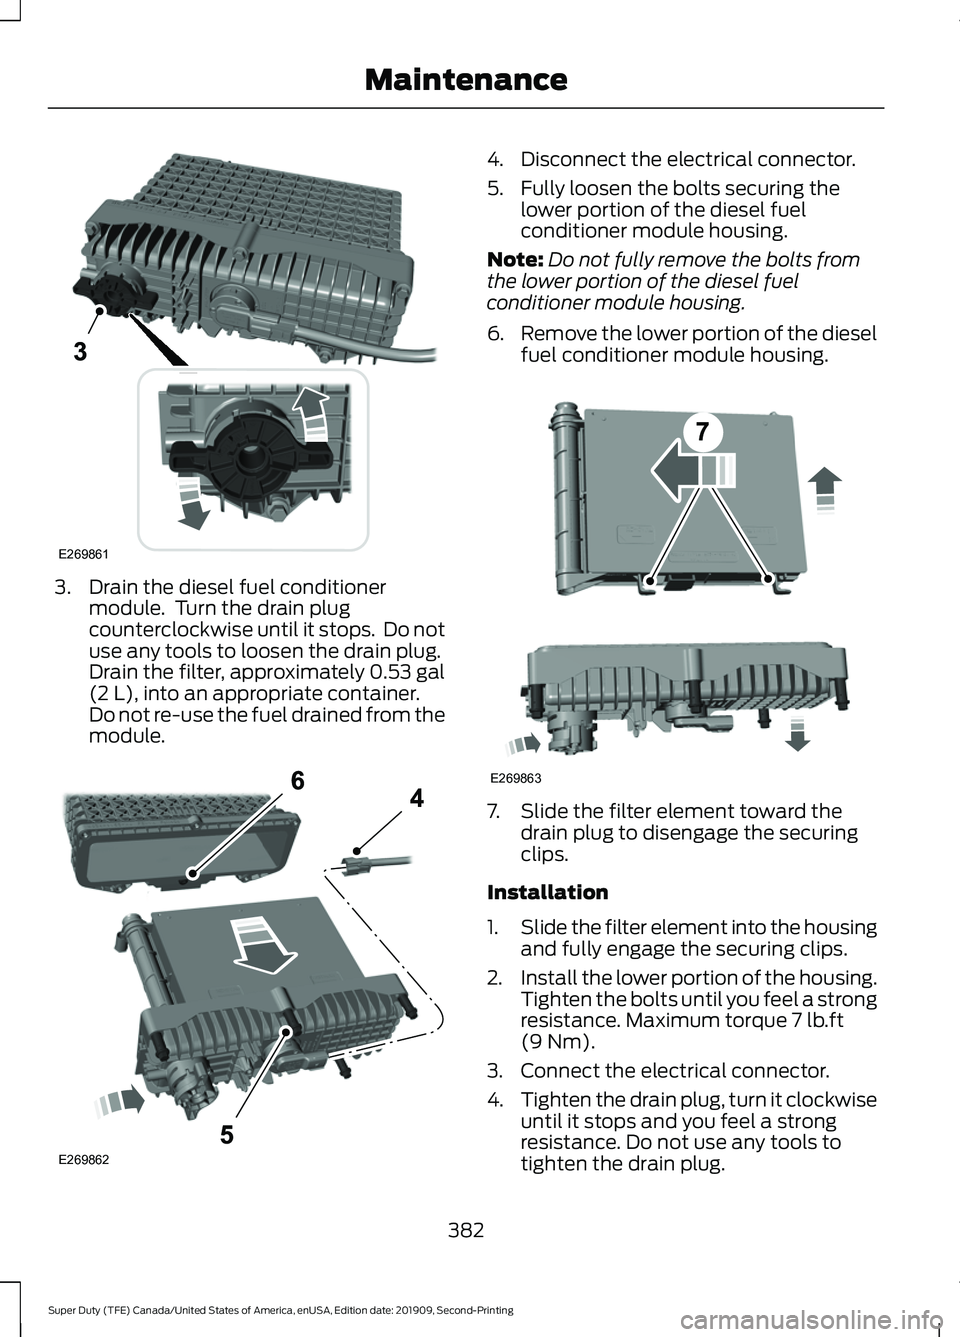 FORD F250 SUPER DUTY 2020  Owners Manual 3. Drain the diesel fuel conditioner
module.  Turn the drain plug
counterclockwise until it stops.  Do not
use any tools to loosen the drain plug.
Drain the filter, approximately 0.53 gal
(2 L), into 